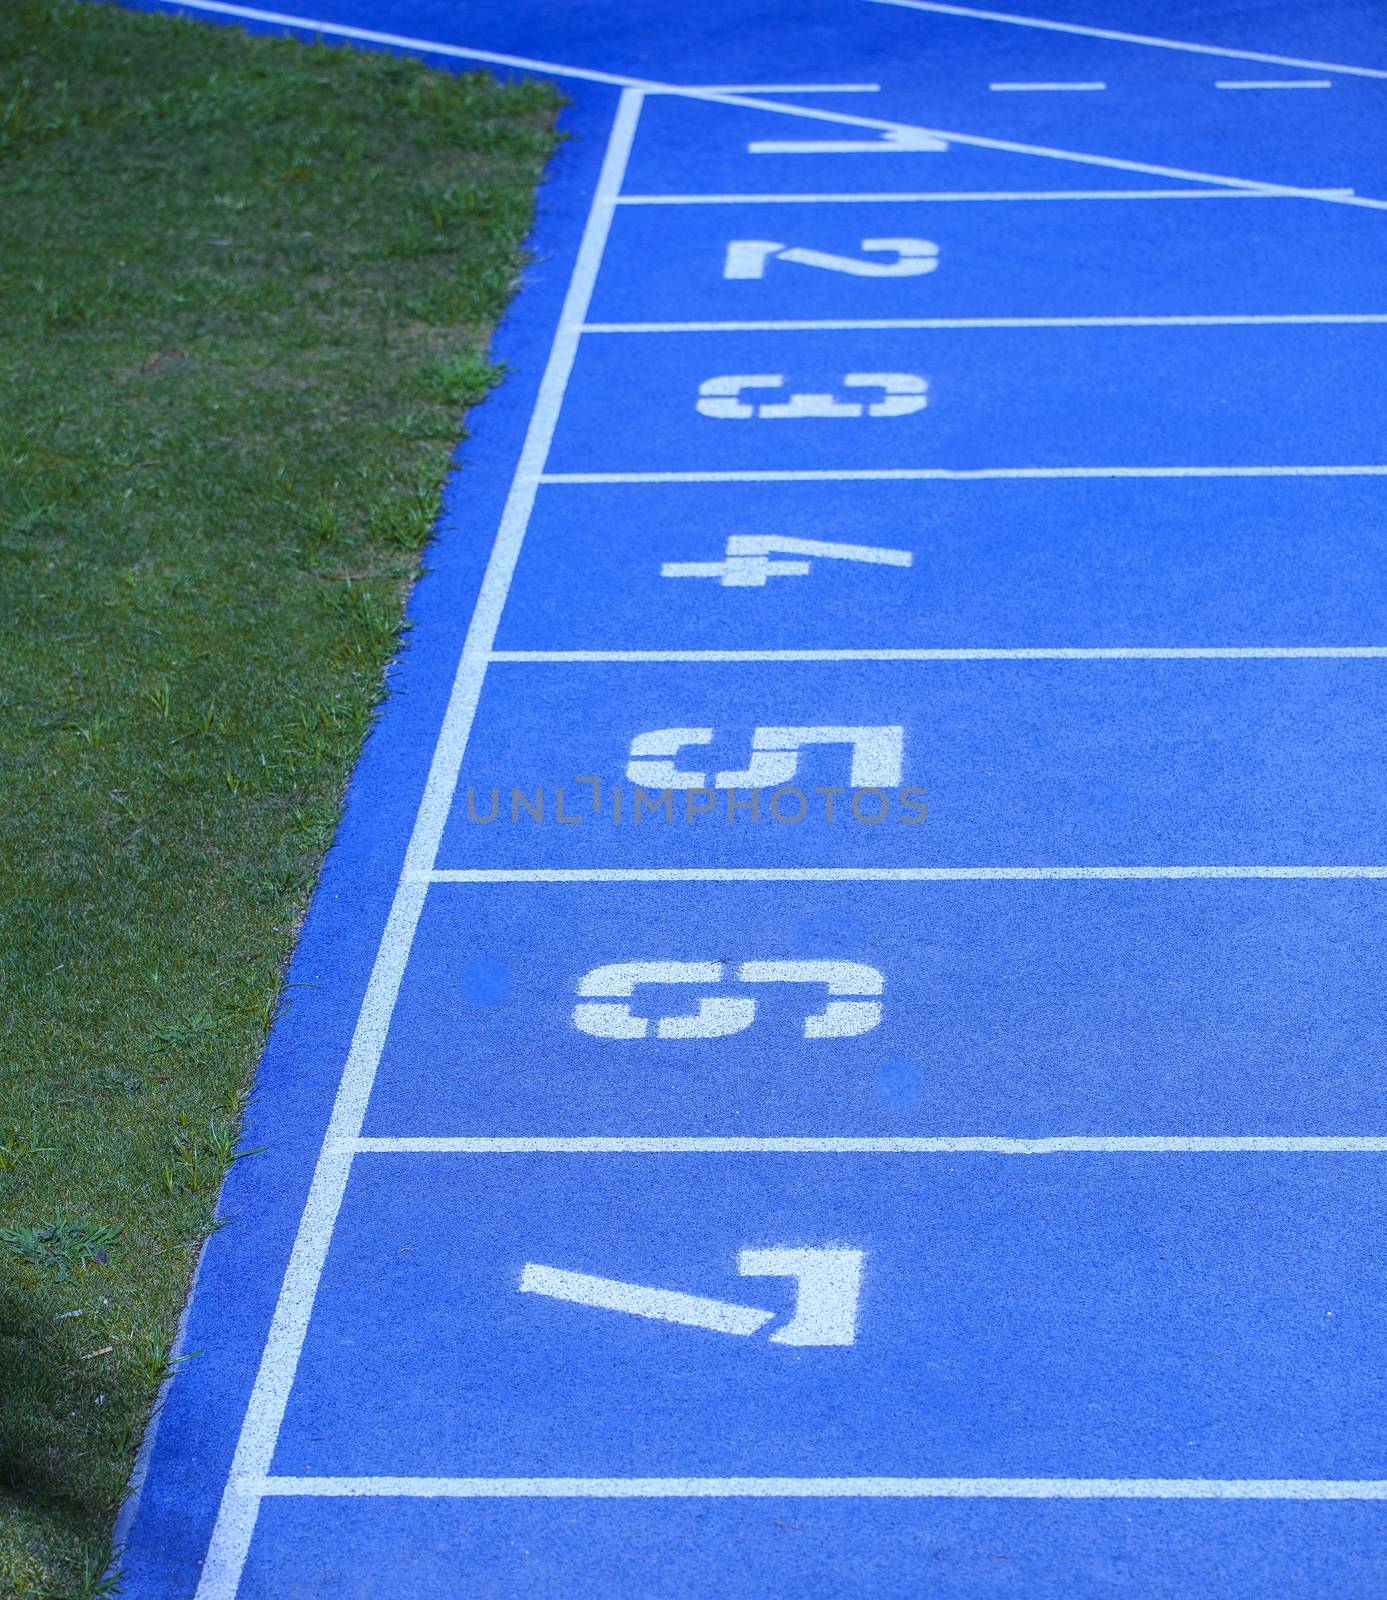 Blue athletic track in a stadium by nachrc2001